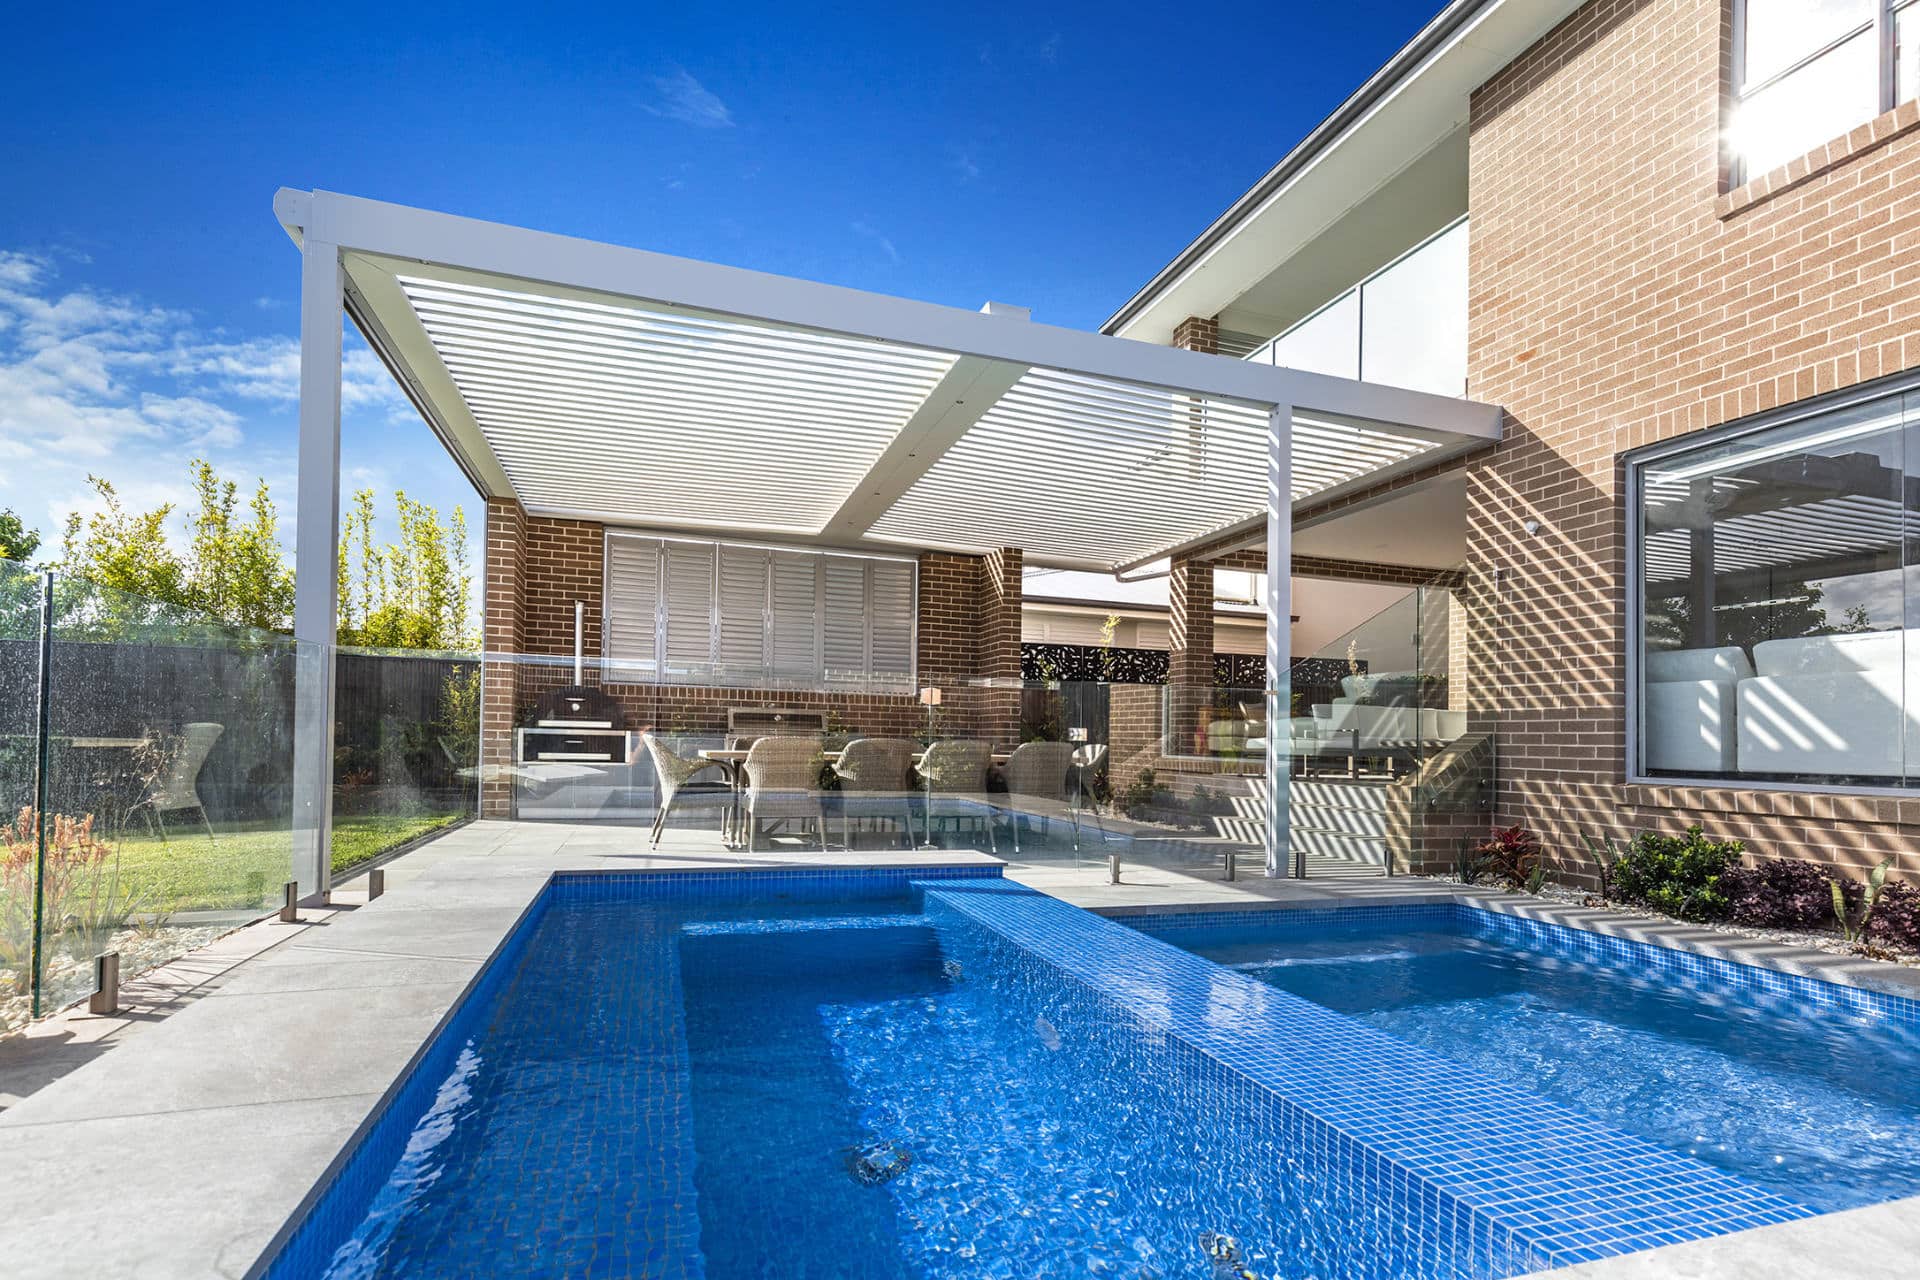 A North Kellyville home with new opening roof pergola alongside pool area